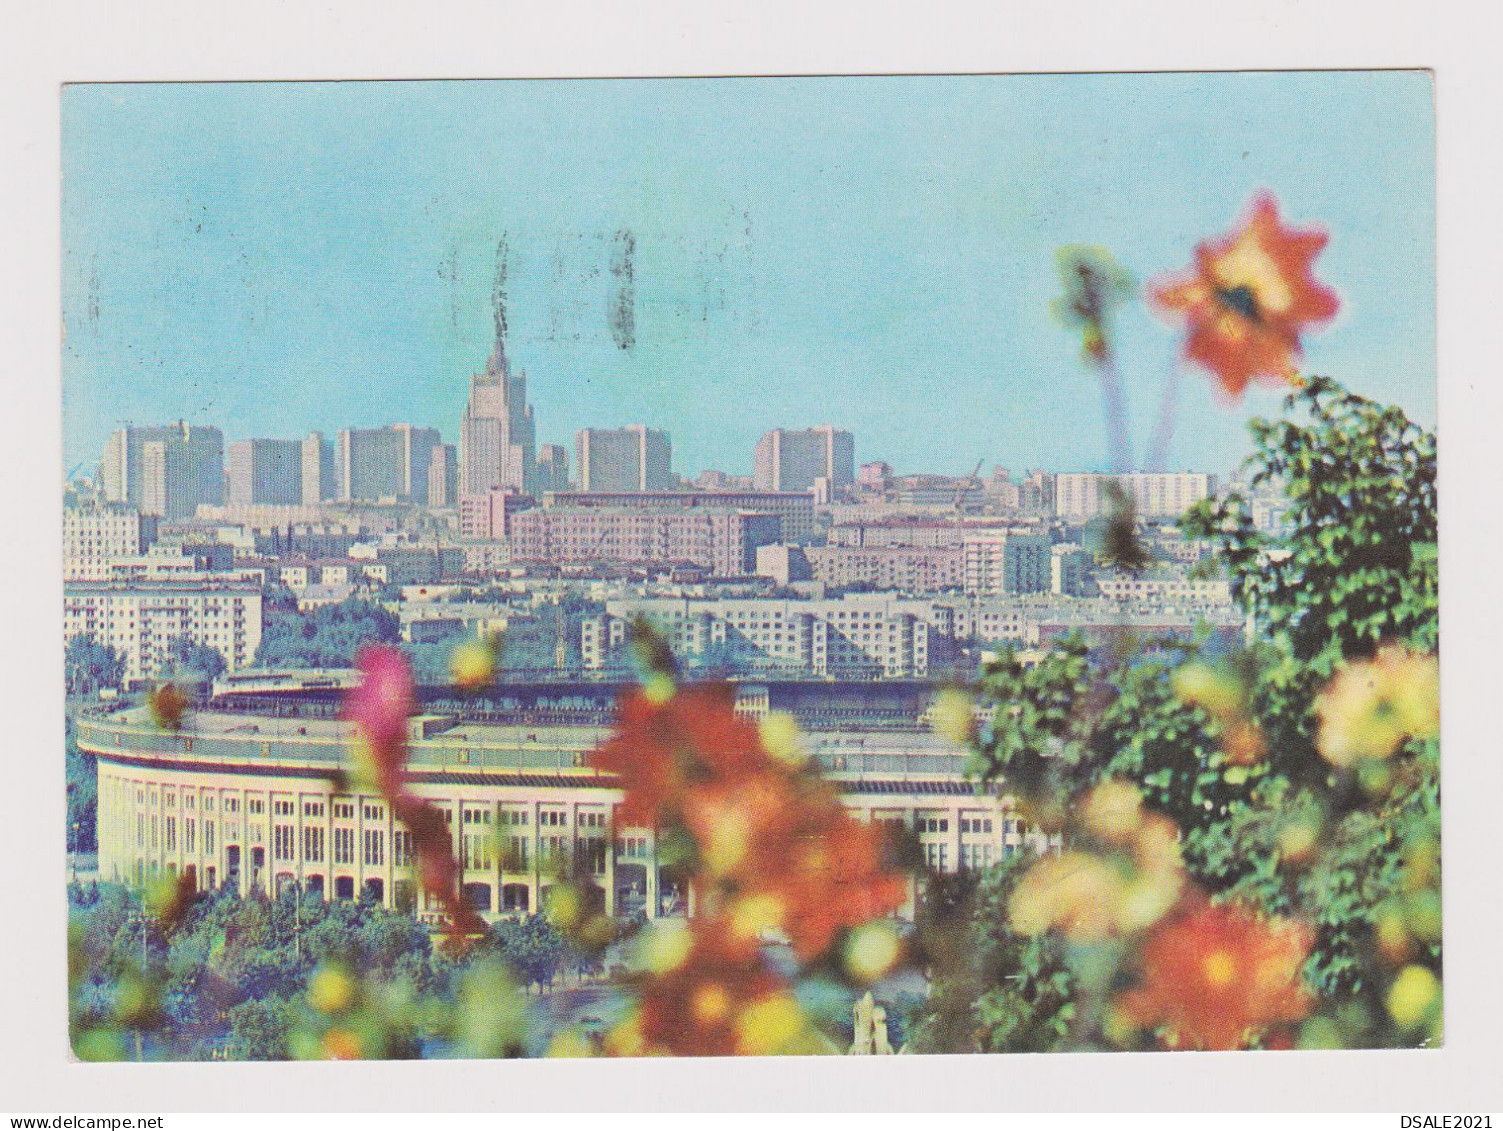 Russia USSR, 1970s Postal Stationery Card, Entier, MOSCOW View Stadium, W/Topic Stamp Sent Airmail To Bulgaria (816) - 1970-79